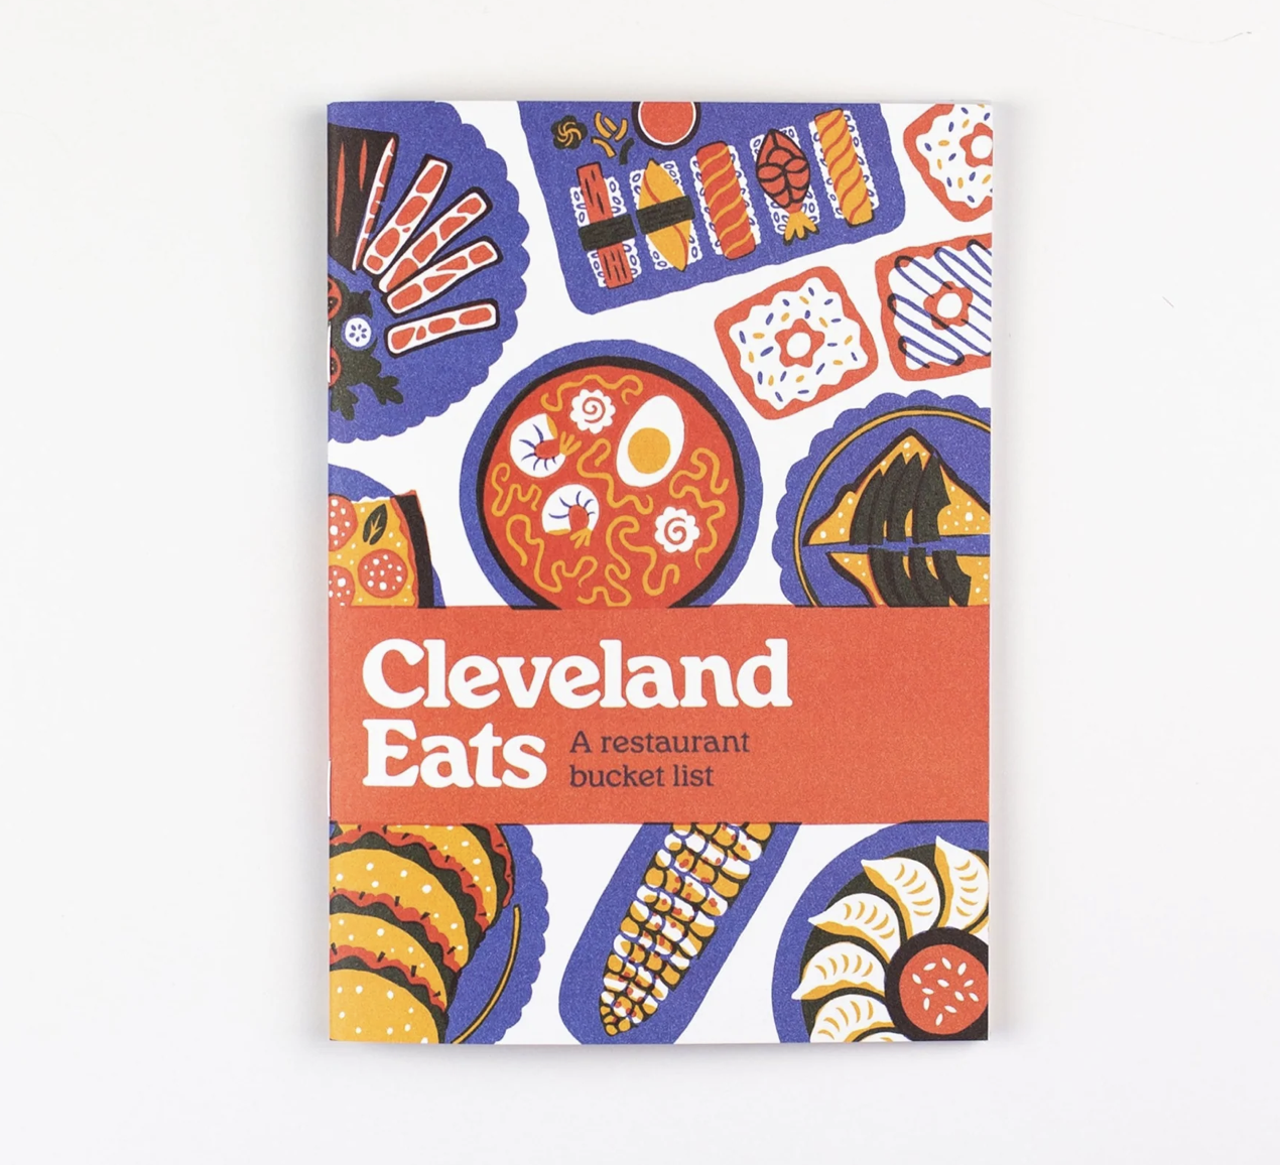 Cleveland Eats: A Restaurant Bucket List This book provides a list of the best restaurants Cleveland has to offer across a multitude of different cuisines.  There is also an intro for each cooking section that discusses the history of that specific food in the city - great information for all foodies in the city.